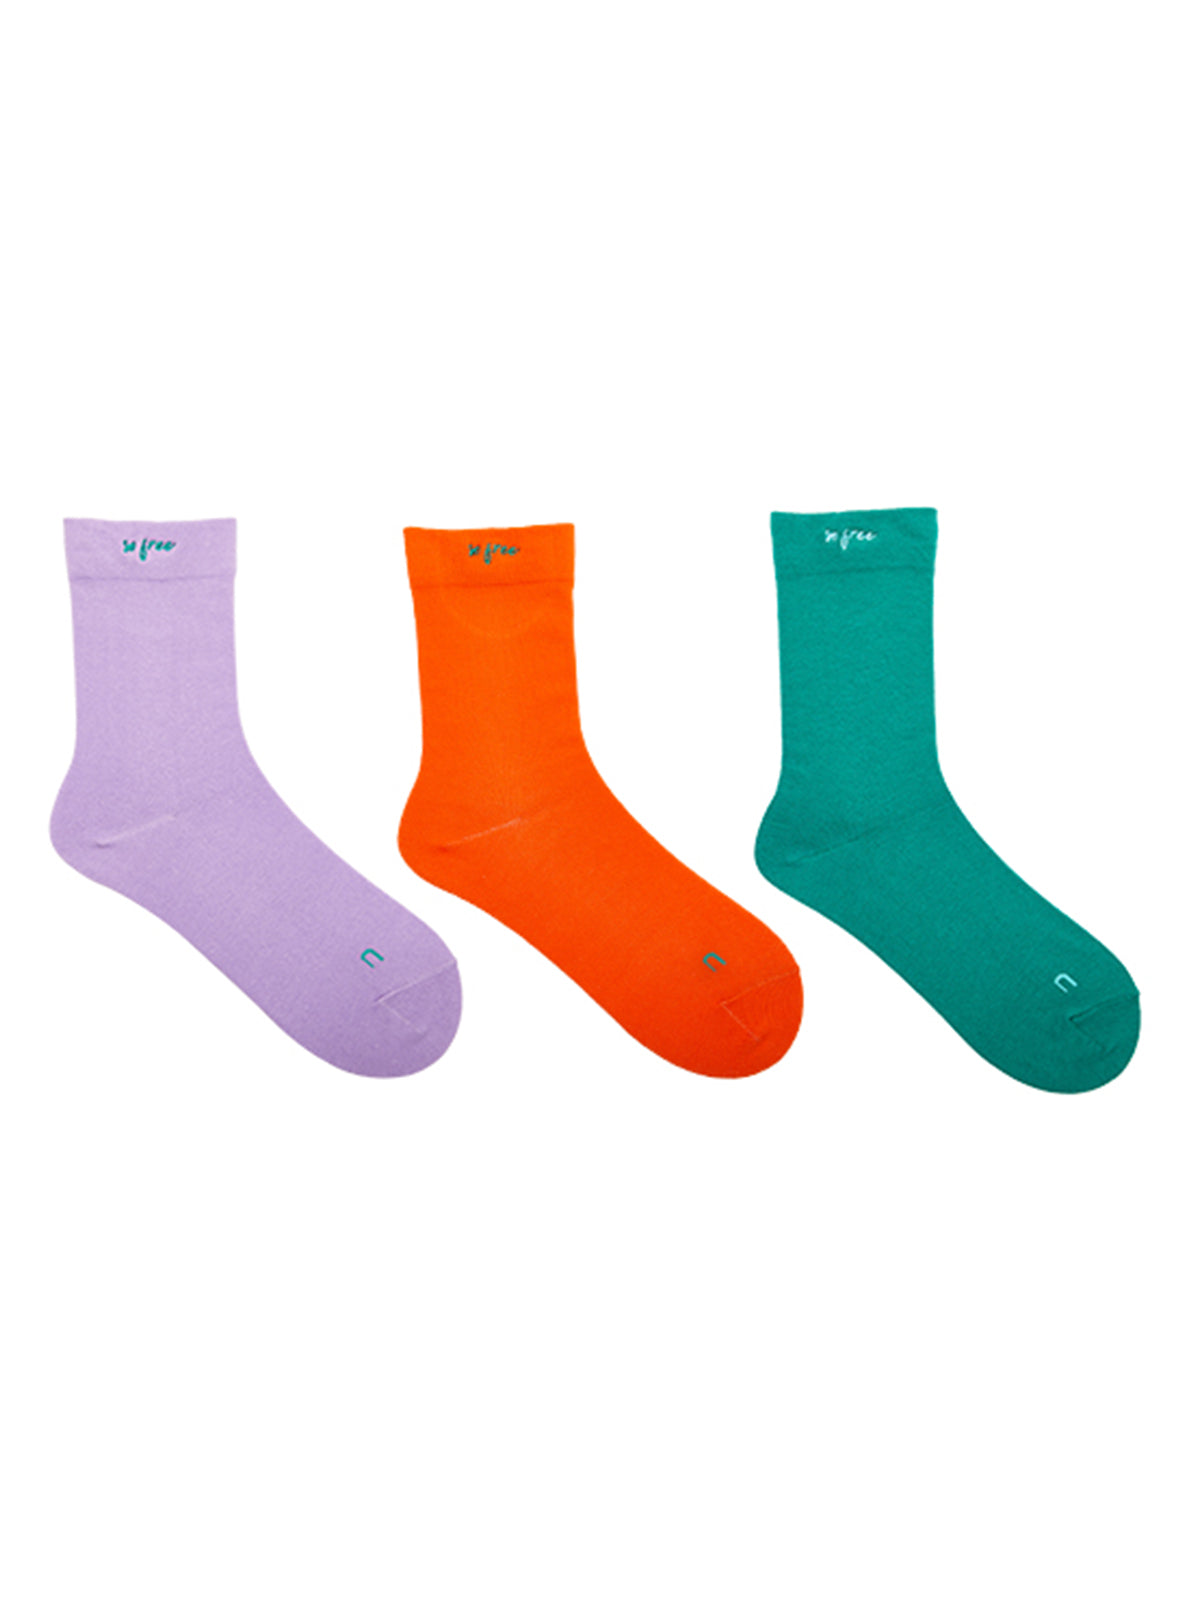 Embroidered Cotton Mid-Calf Socks (Pack of 3)